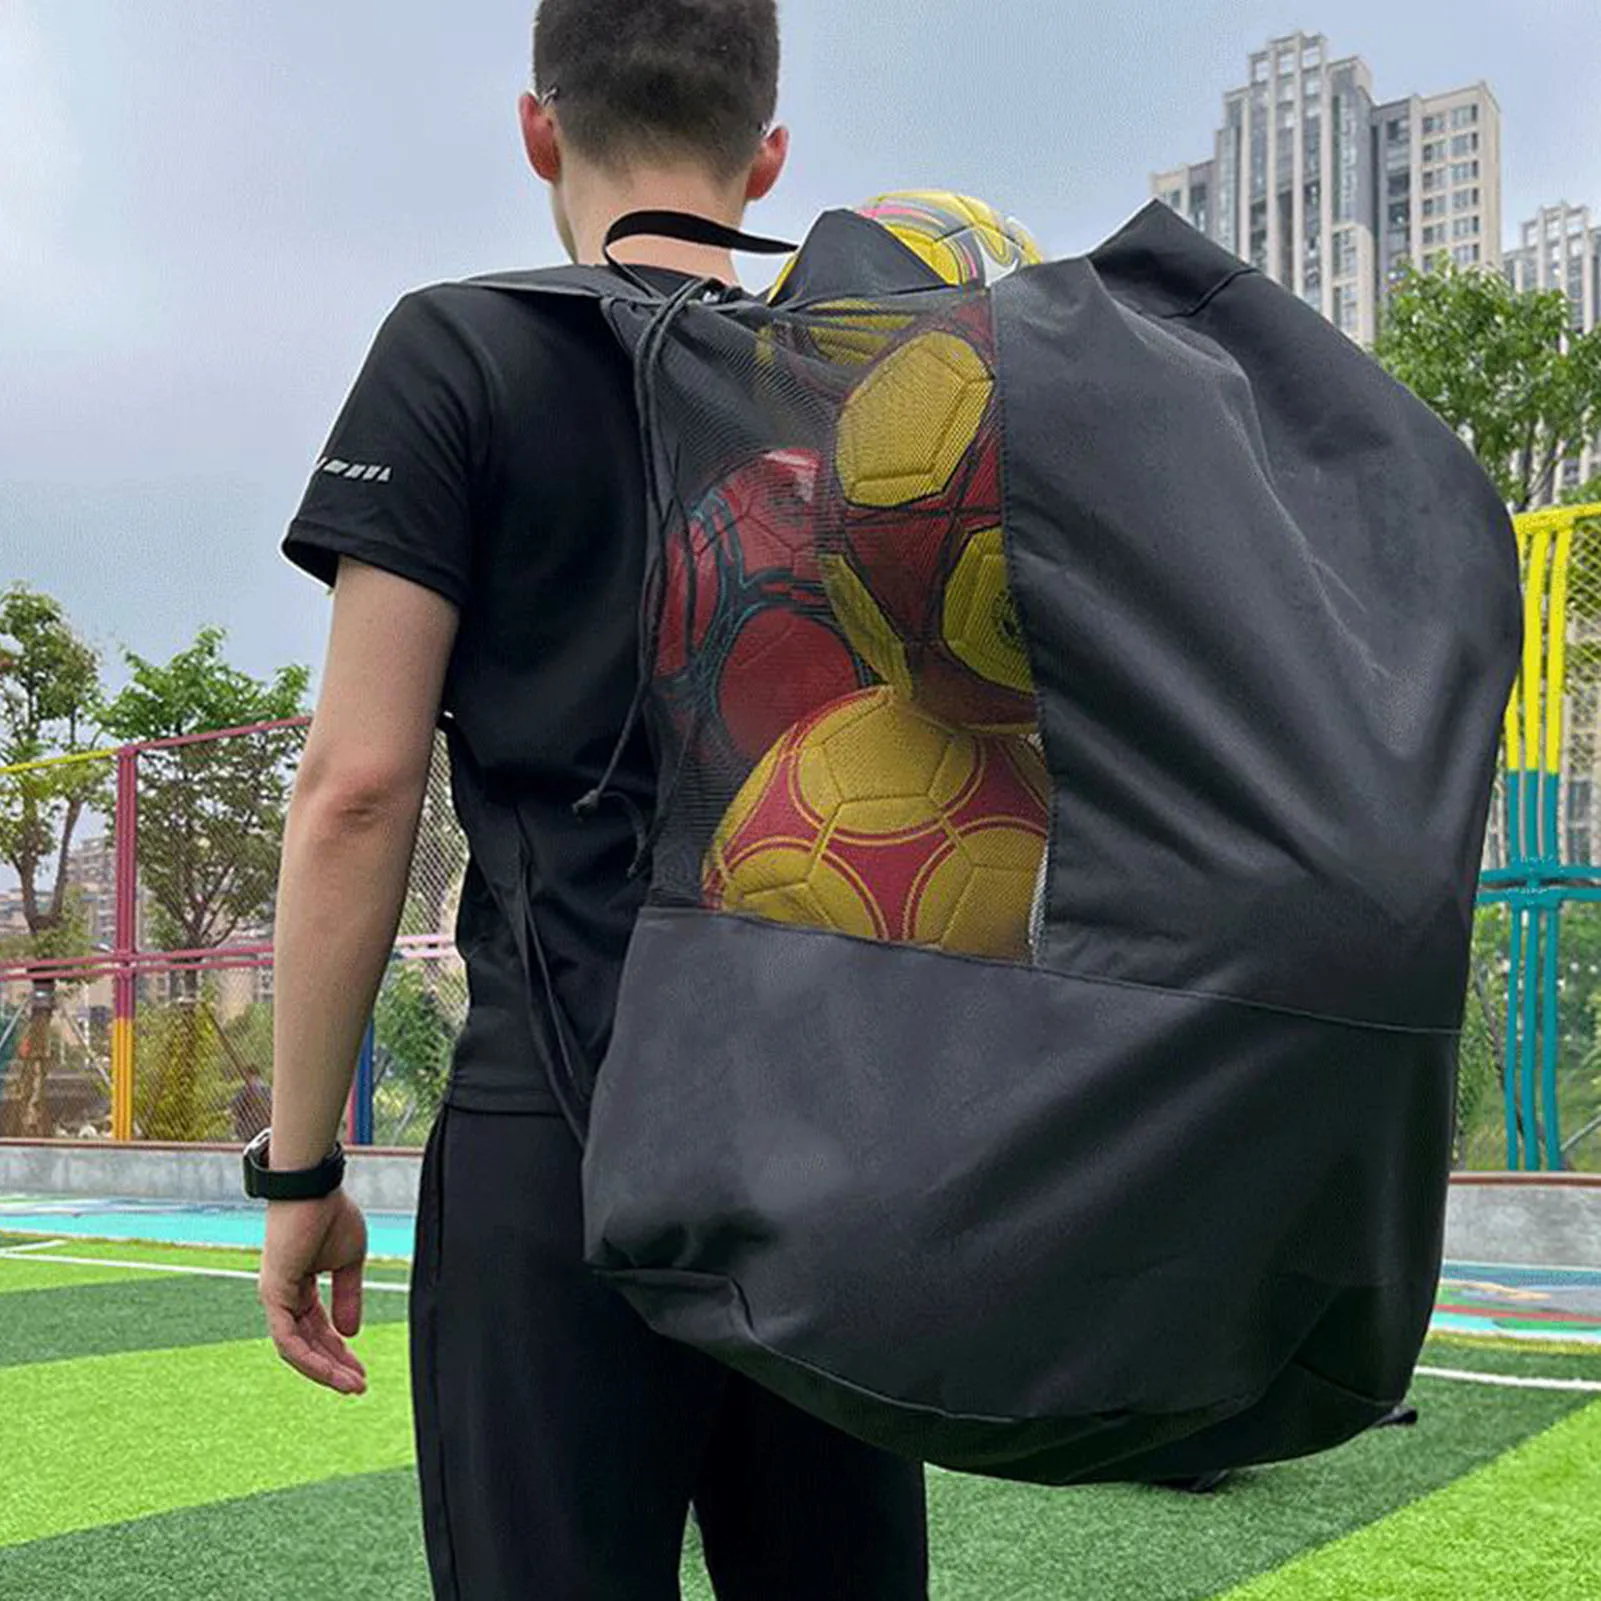 Outdoor Soccer Bag Large Capacity Basketball Volleyball Carrying Sack Waterproof Adjustable Heavy Duty Ball Polyester Mesh